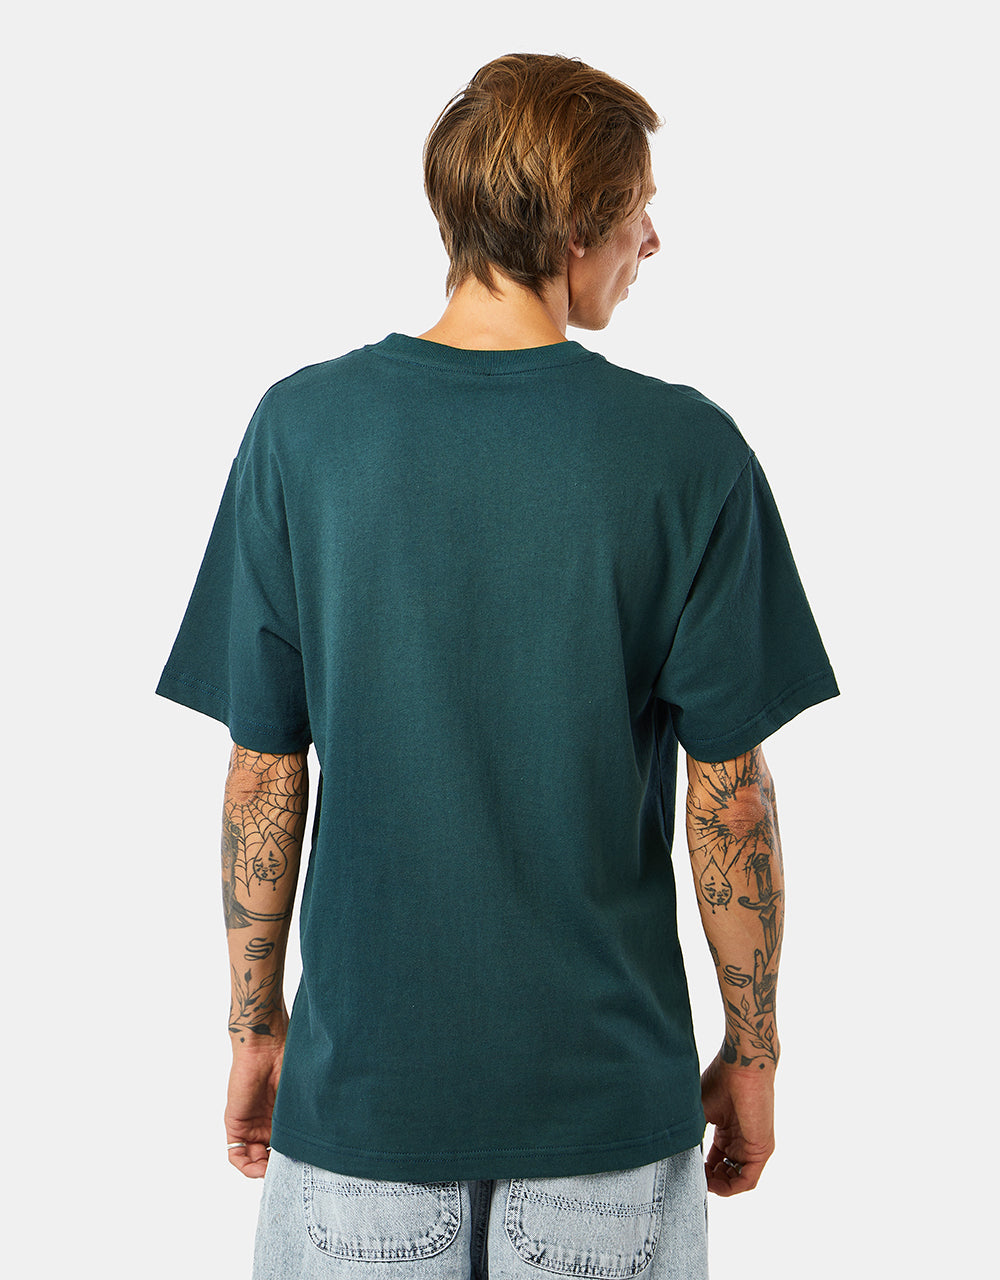 Nike SB Embroidered Patch T-Shirt - Deep Jungle